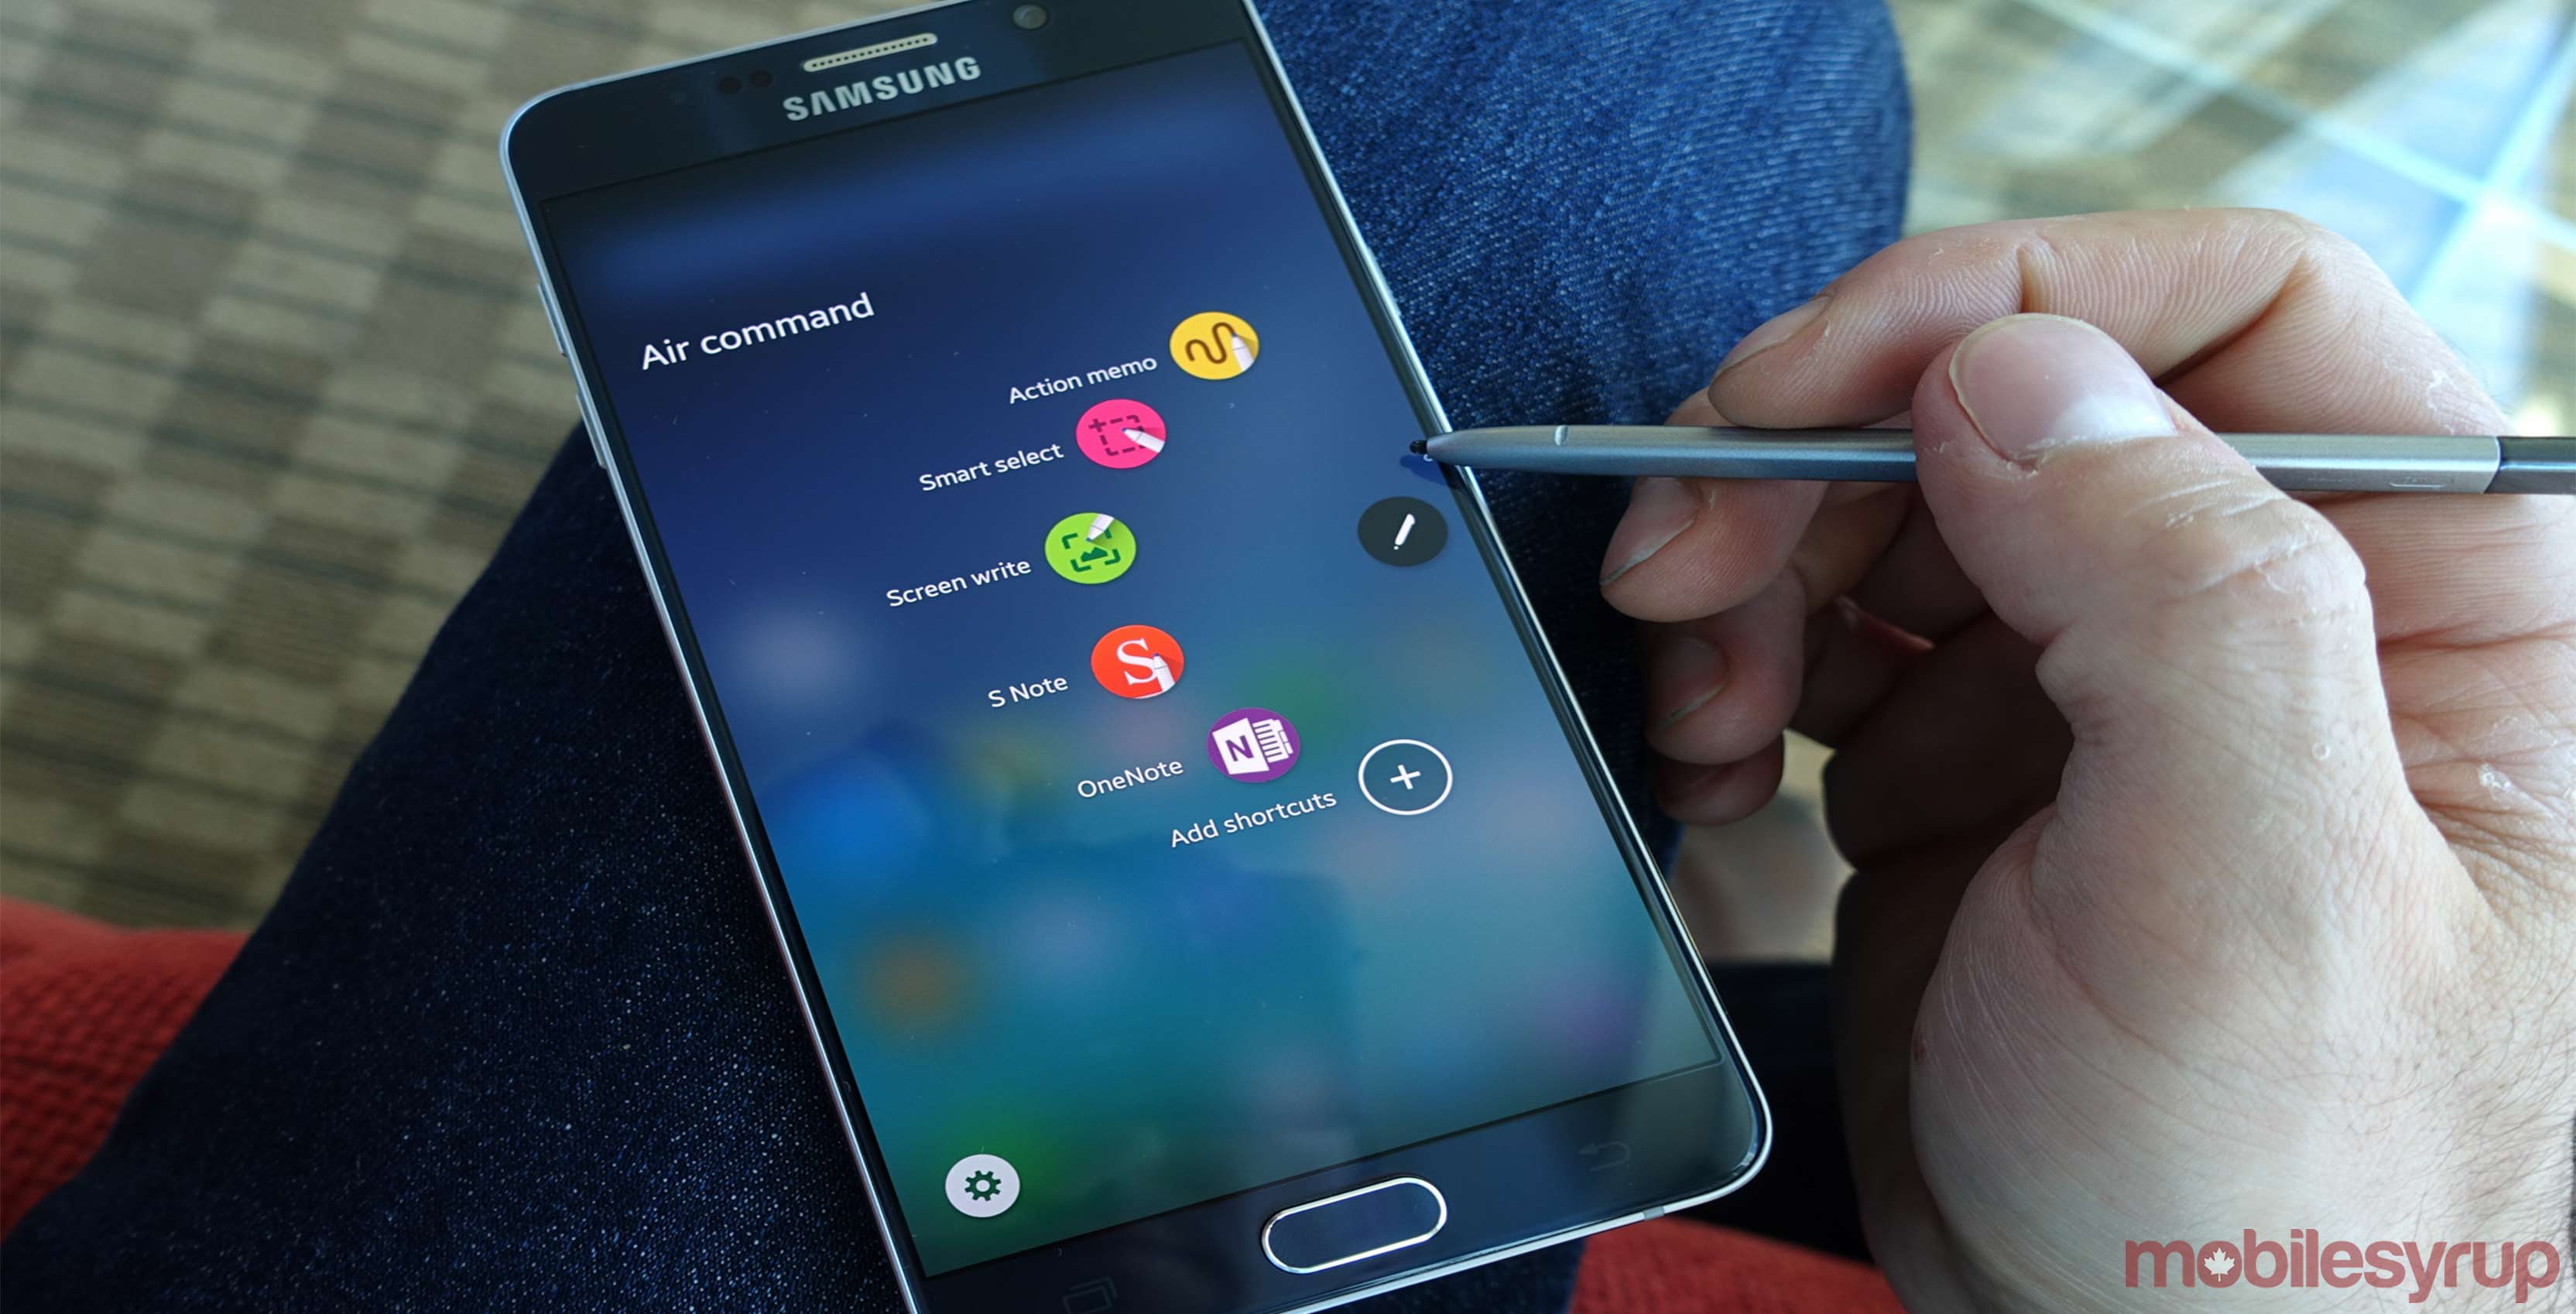 Samsung Galaxy Note 5 smartphone with stylus